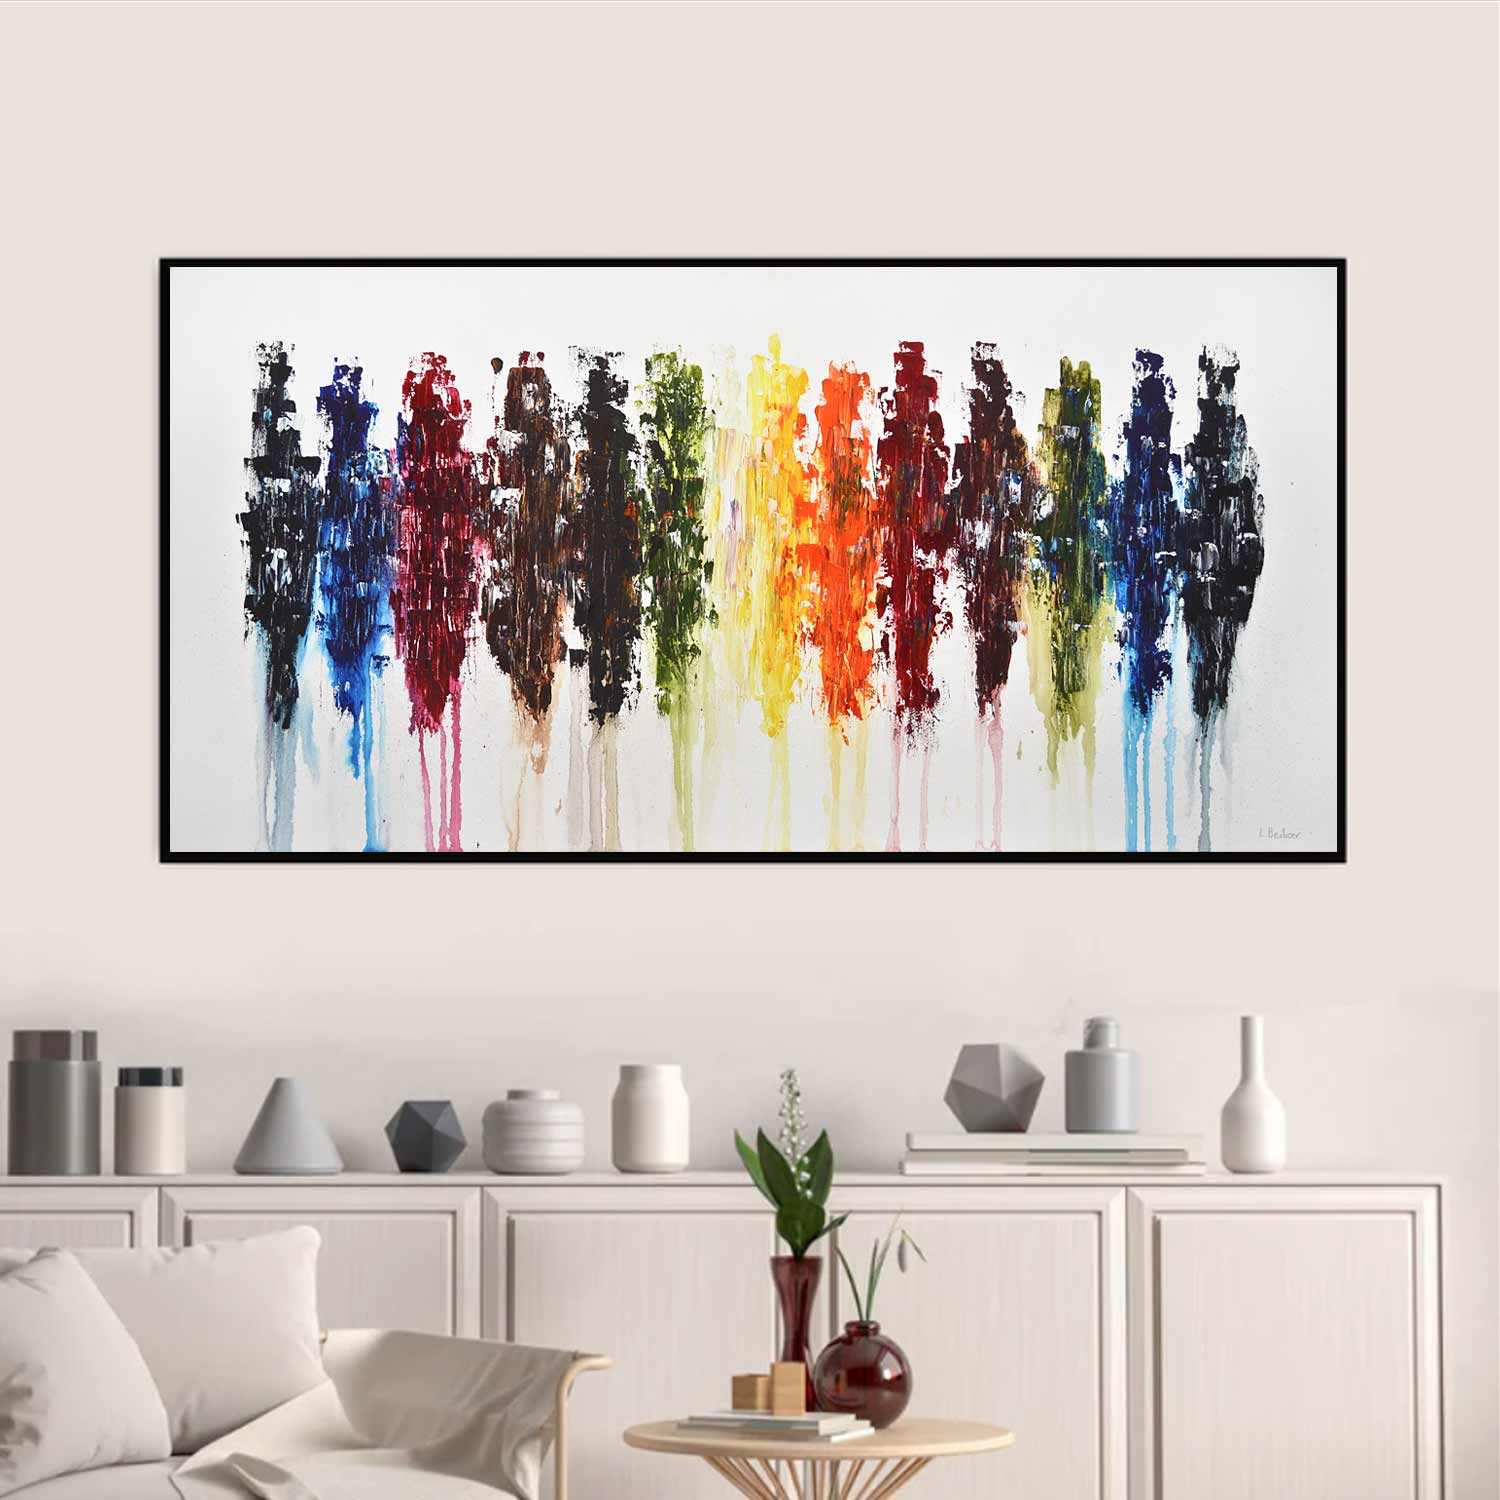 Original Colorful Abstract Painting "Dark on Fire"